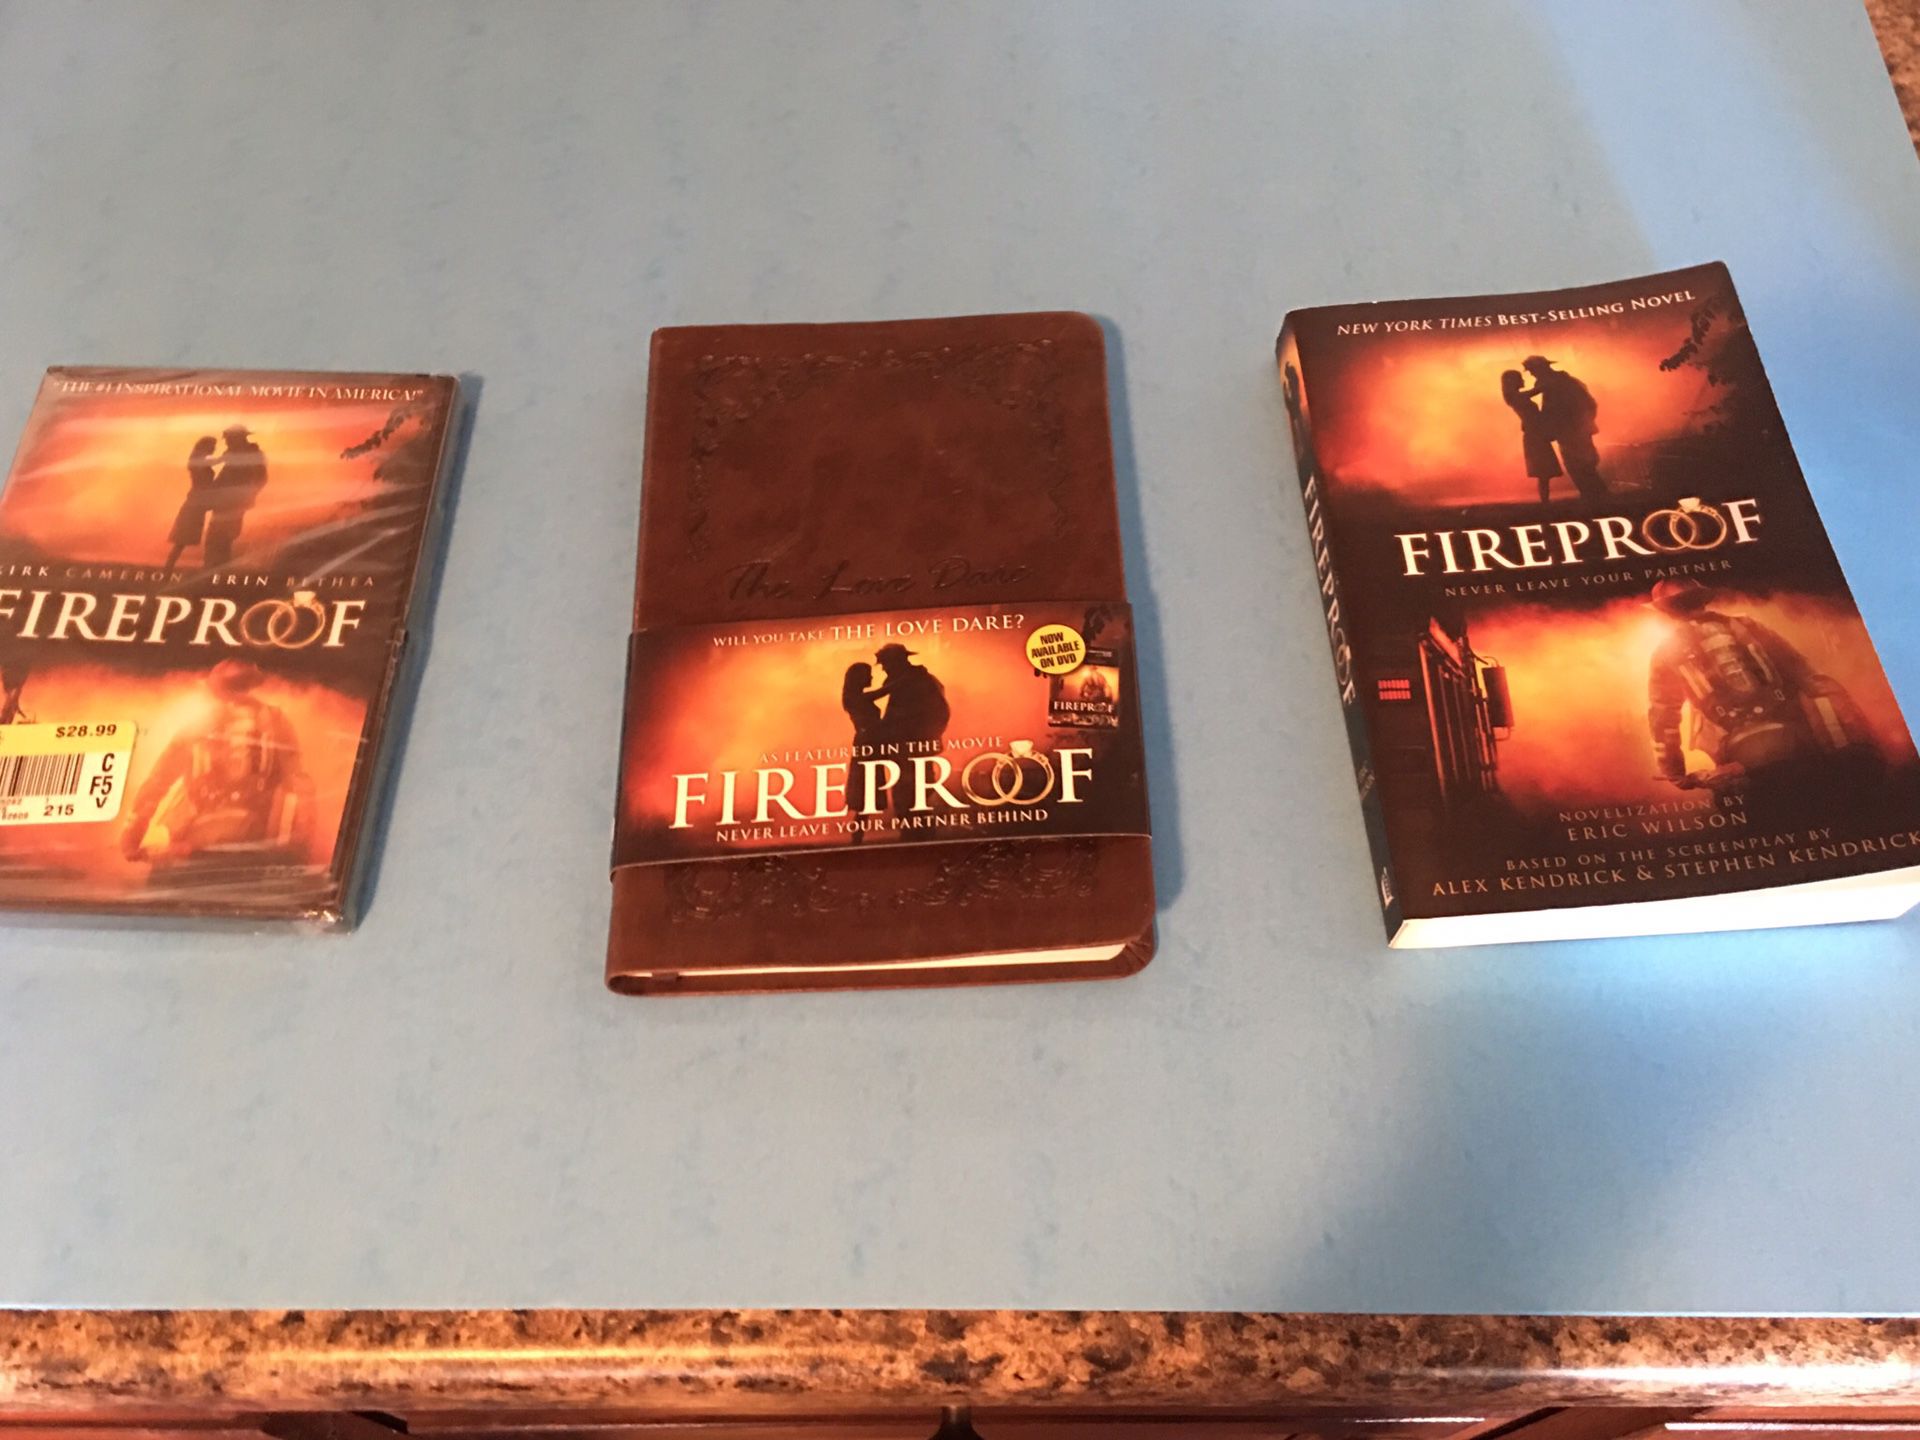 Fireproof Books and DVD